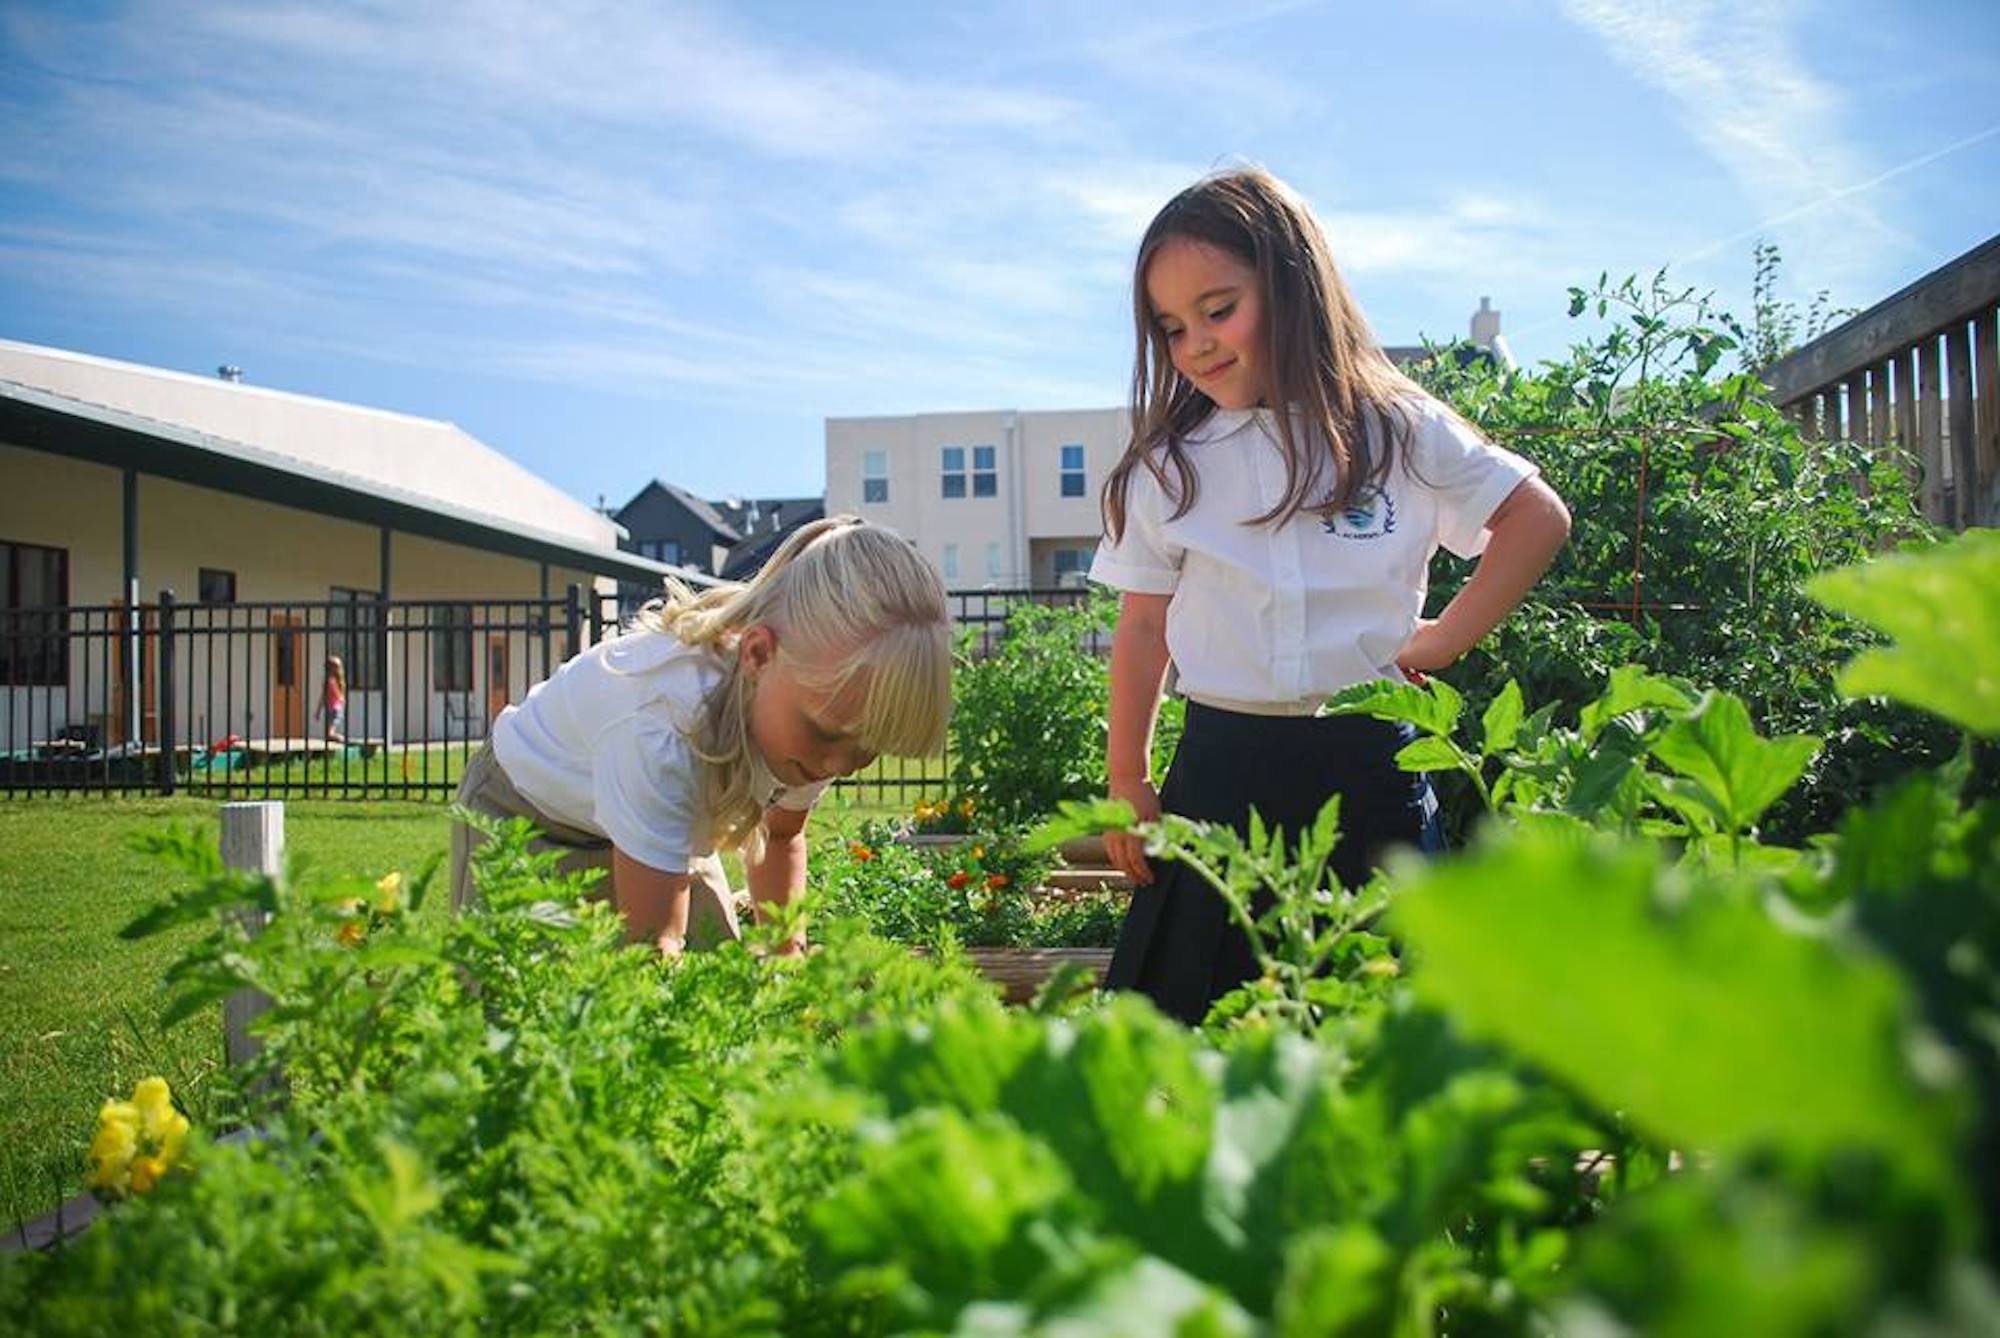 Two young girls in a garden with plants.